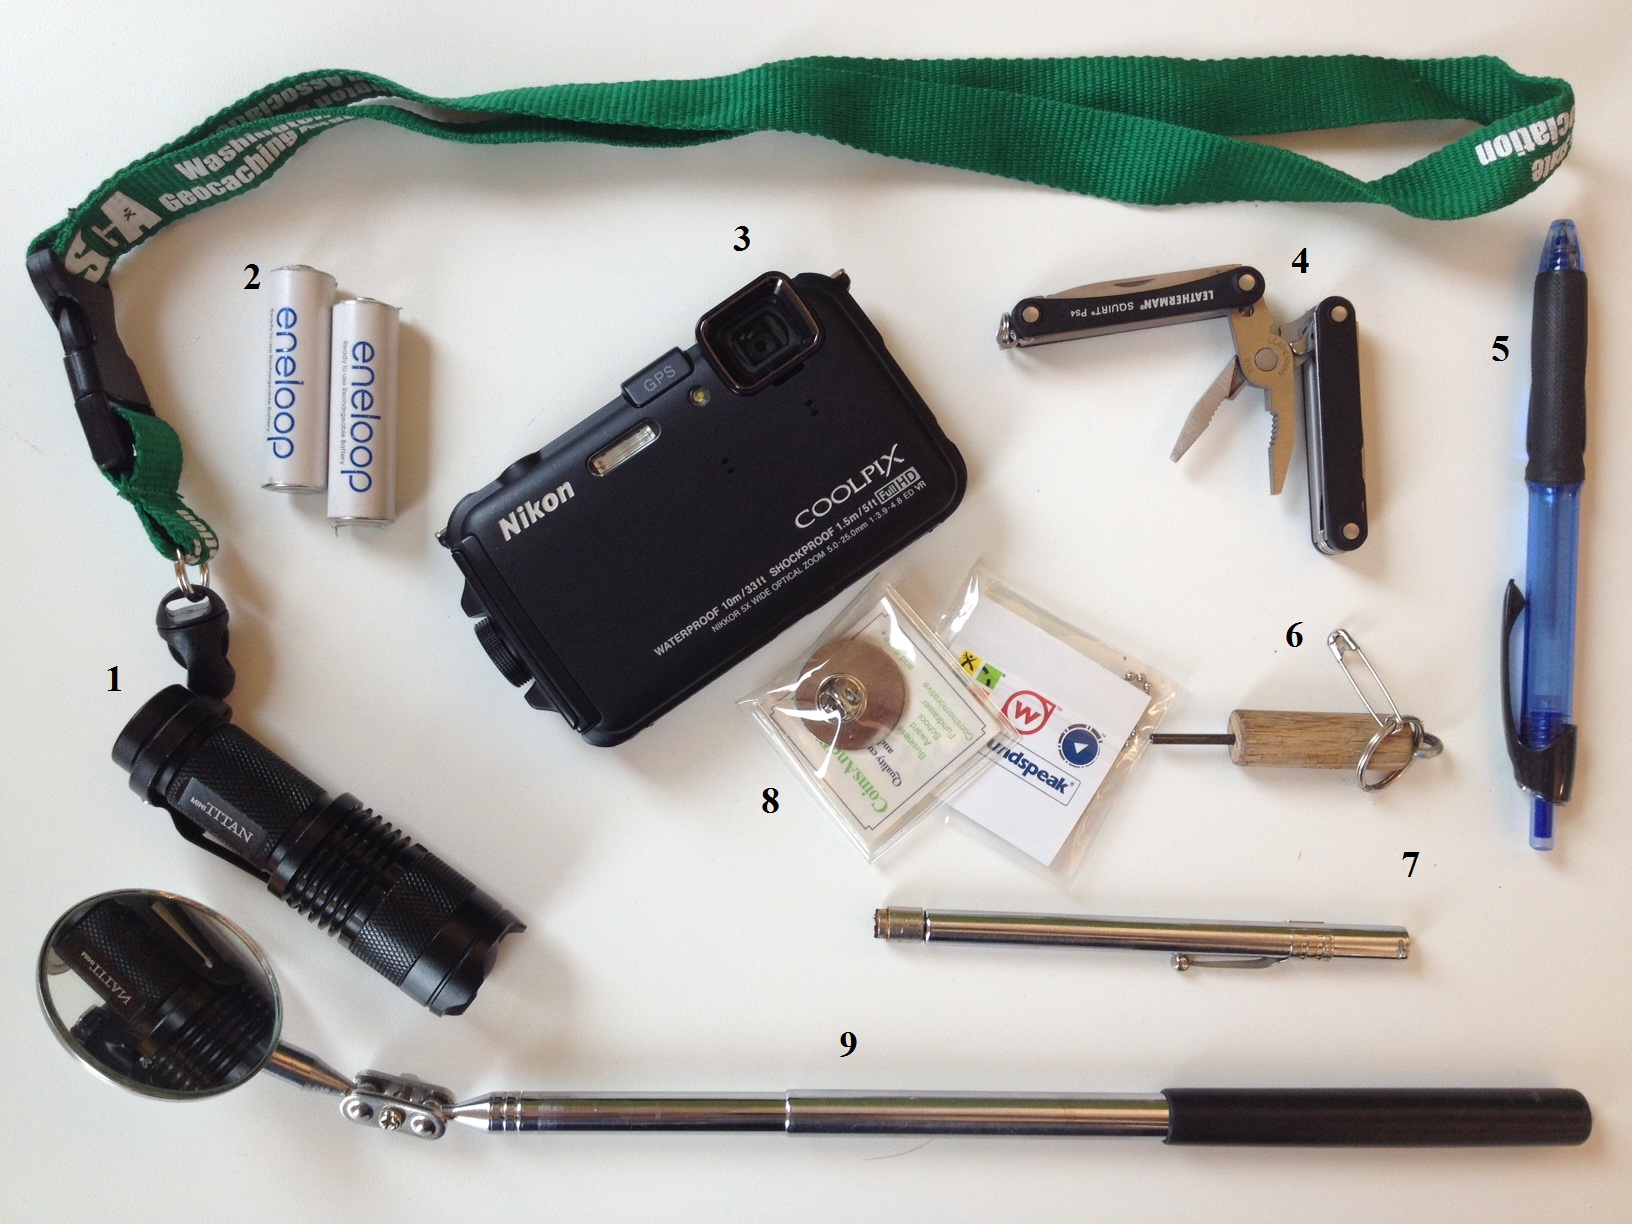 What's in Your Geopack? A Look Inside the Geocaching Bag